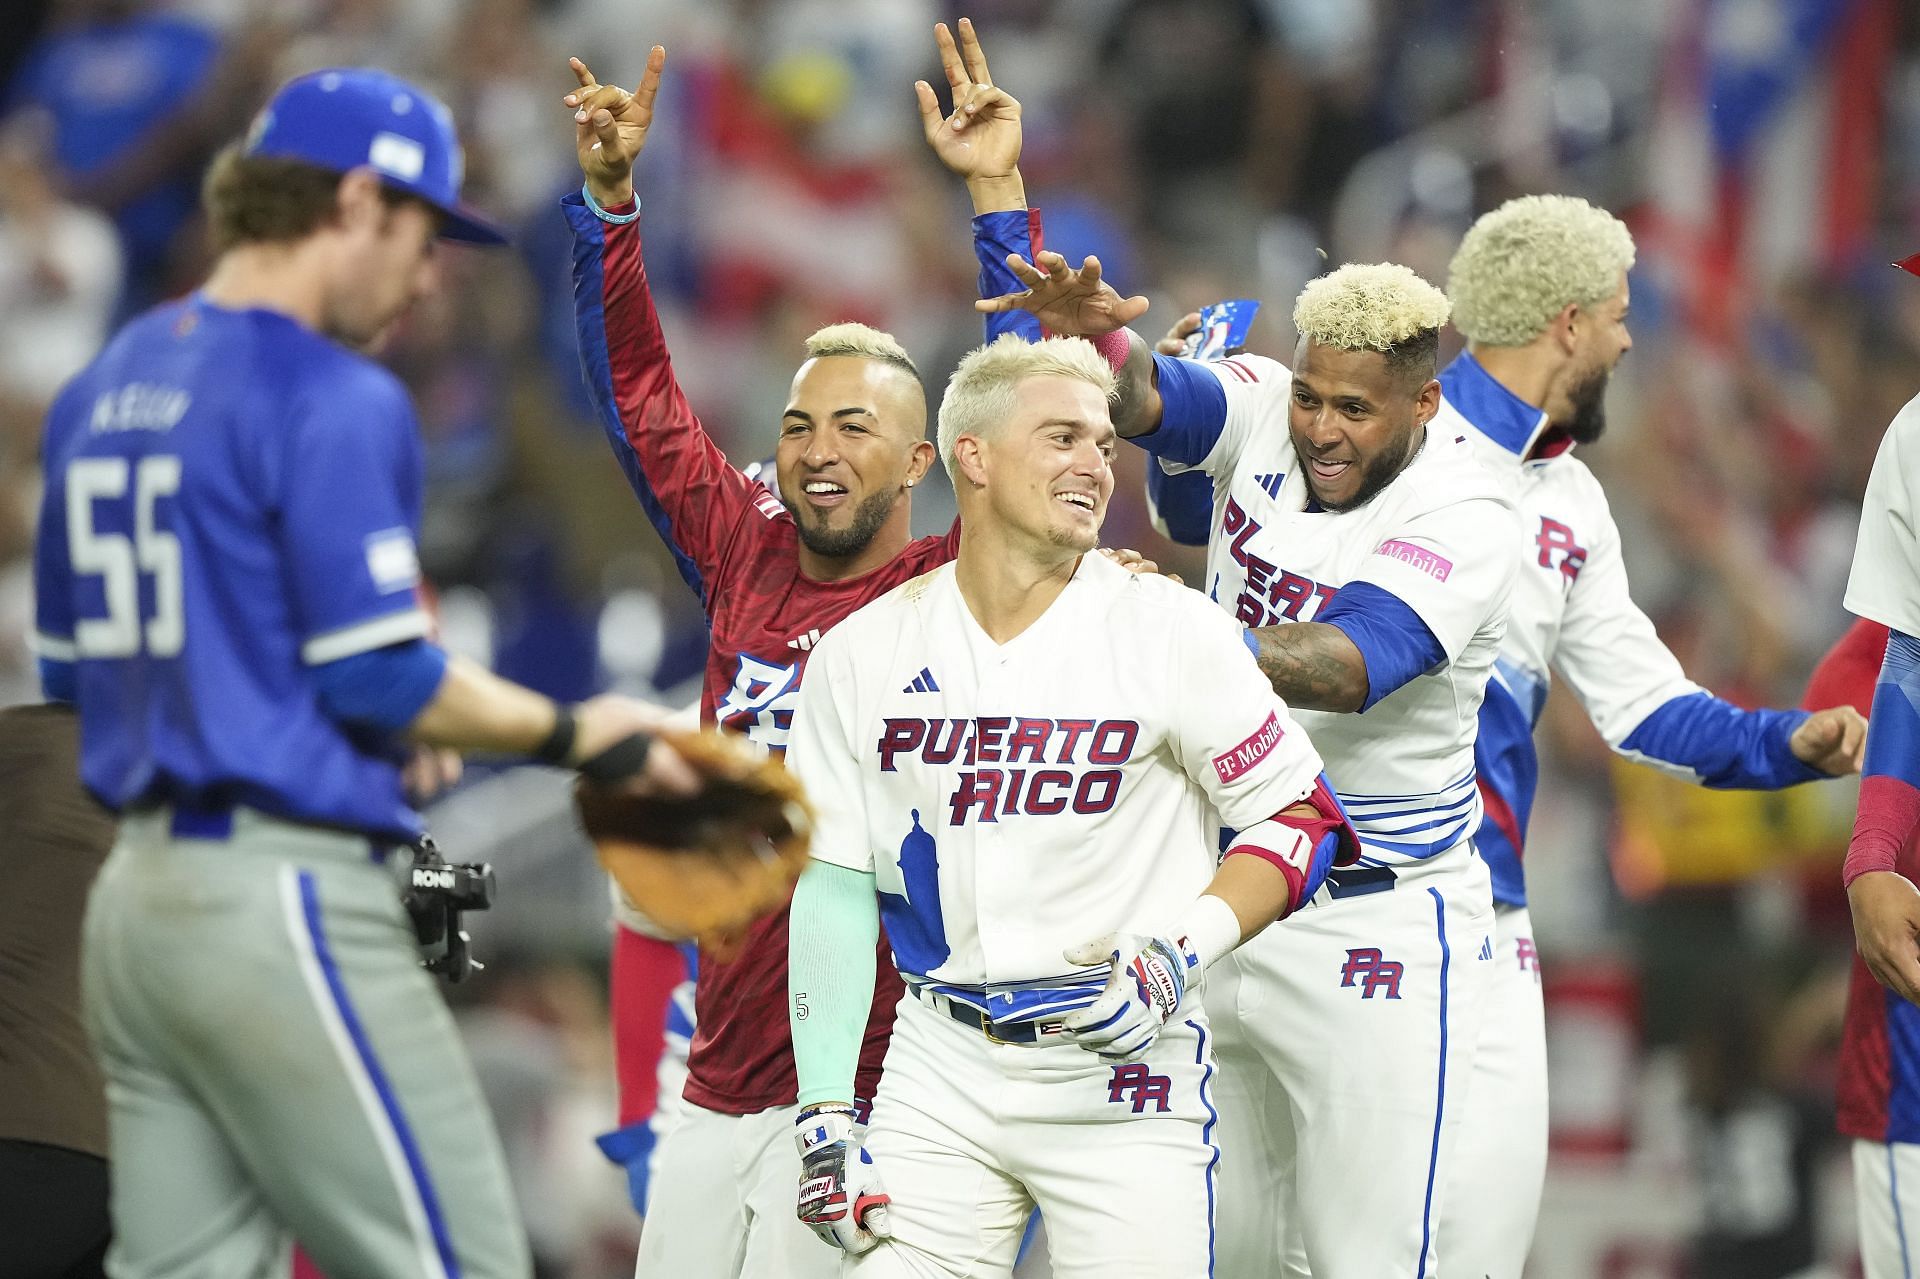 Team Puerto Rico throws first ever perfect game in World Baseball